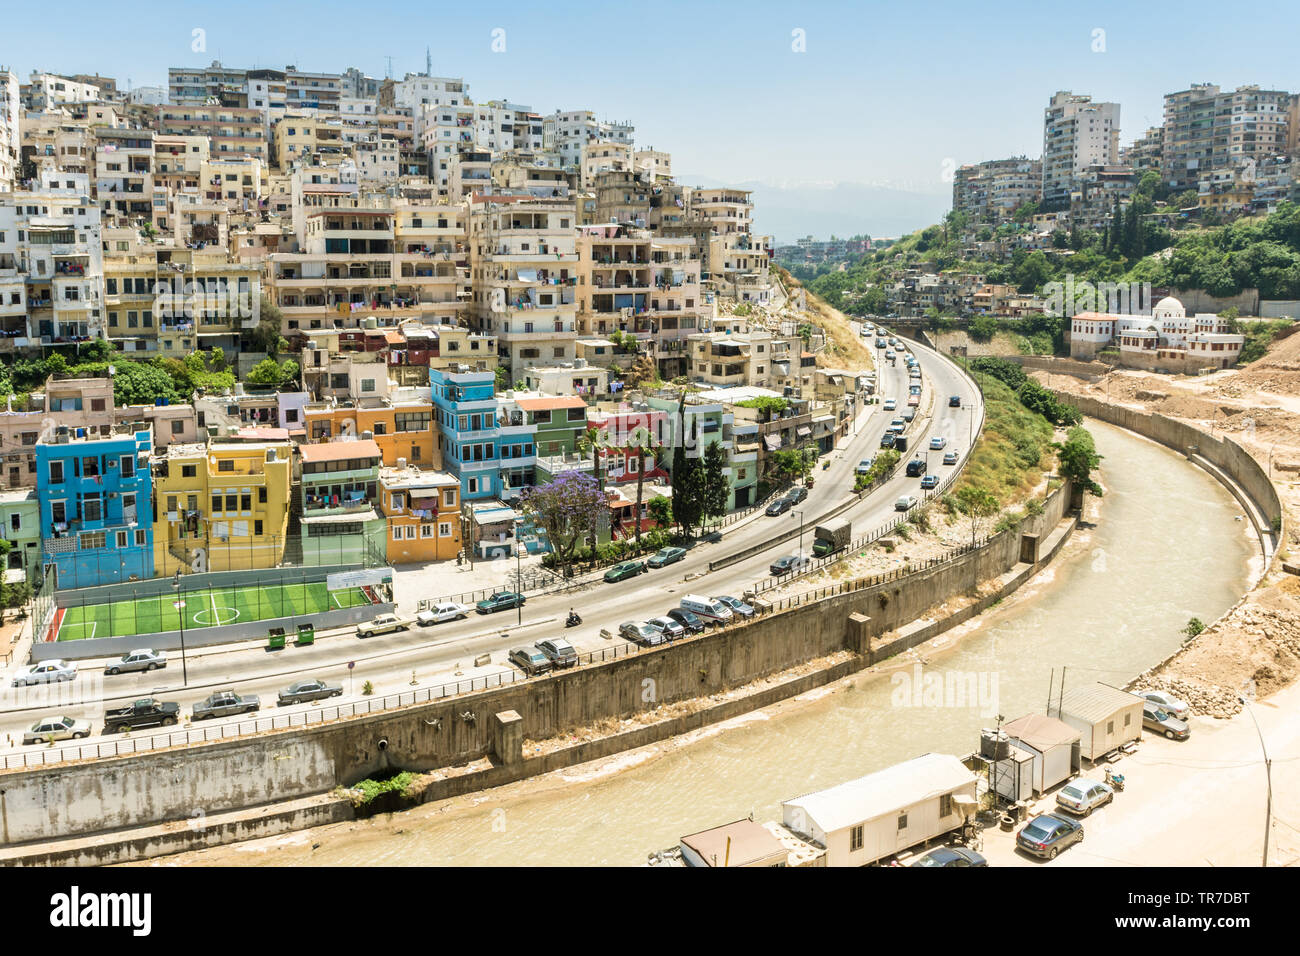 Cluster of buildings covering a small hill in Tripoli, Lebanon Stock Photo